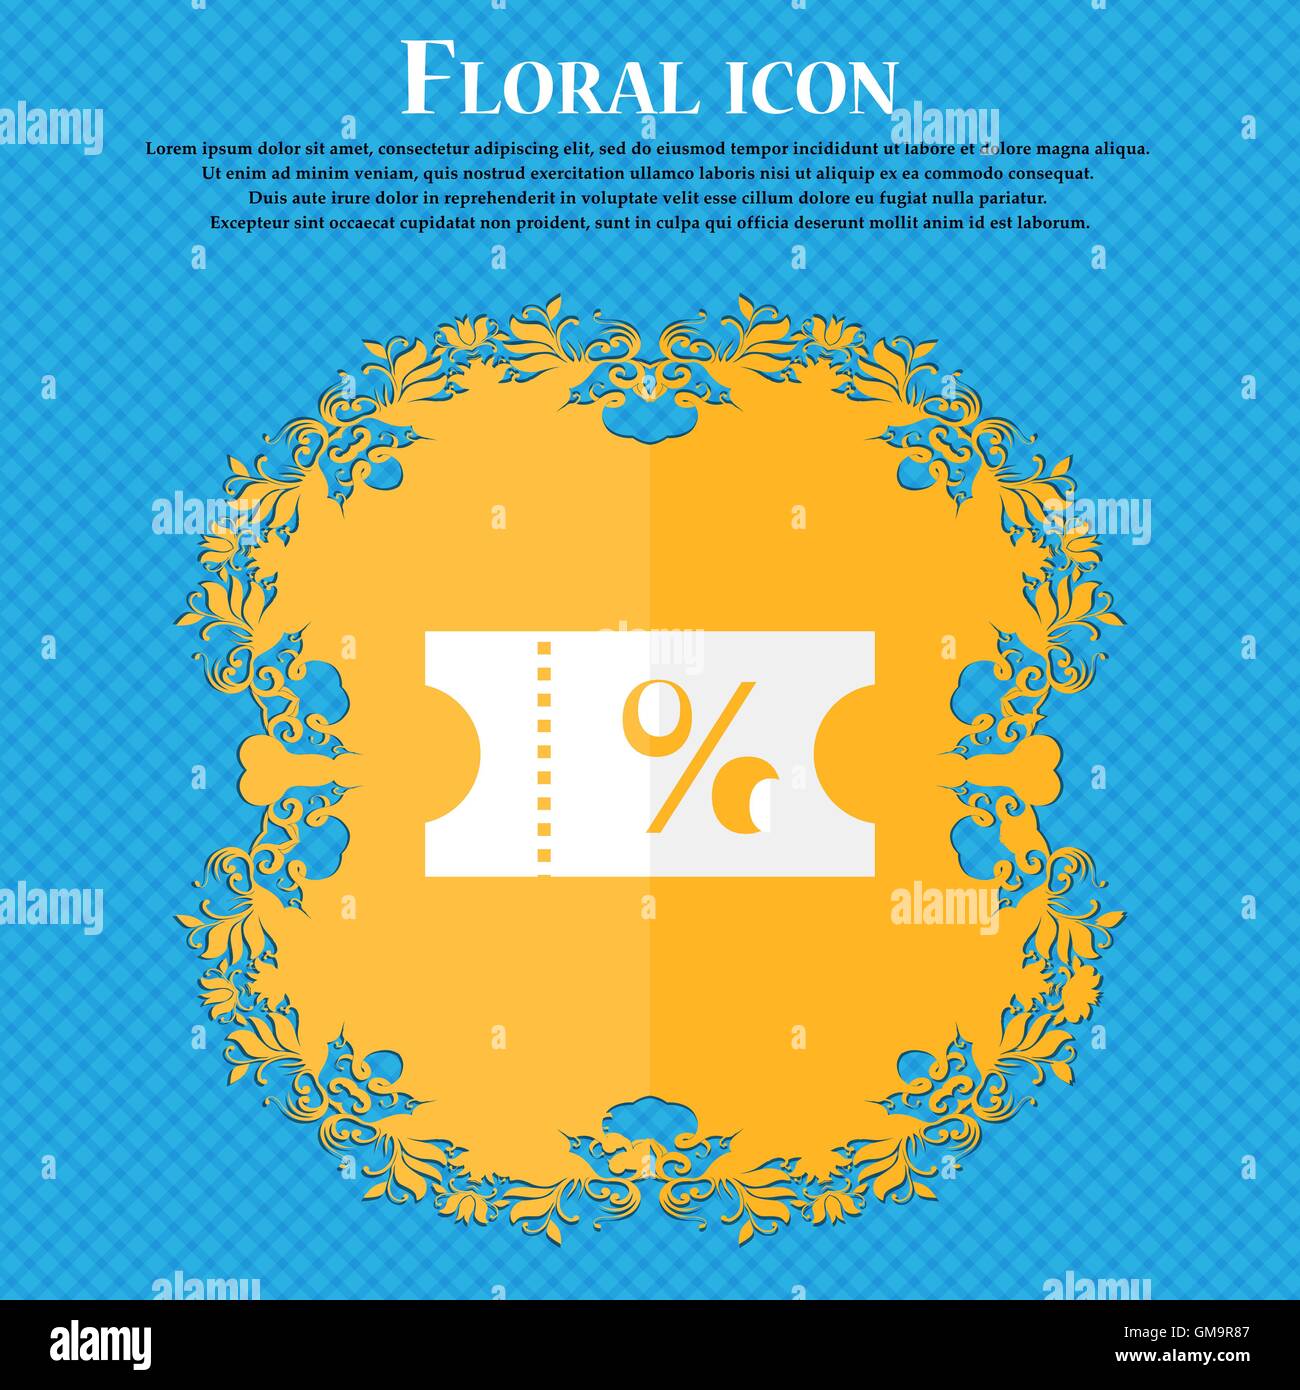 ticket discount icon sign. Floral flat design on a blue abstract background with place for your text. Vector Stock Vector